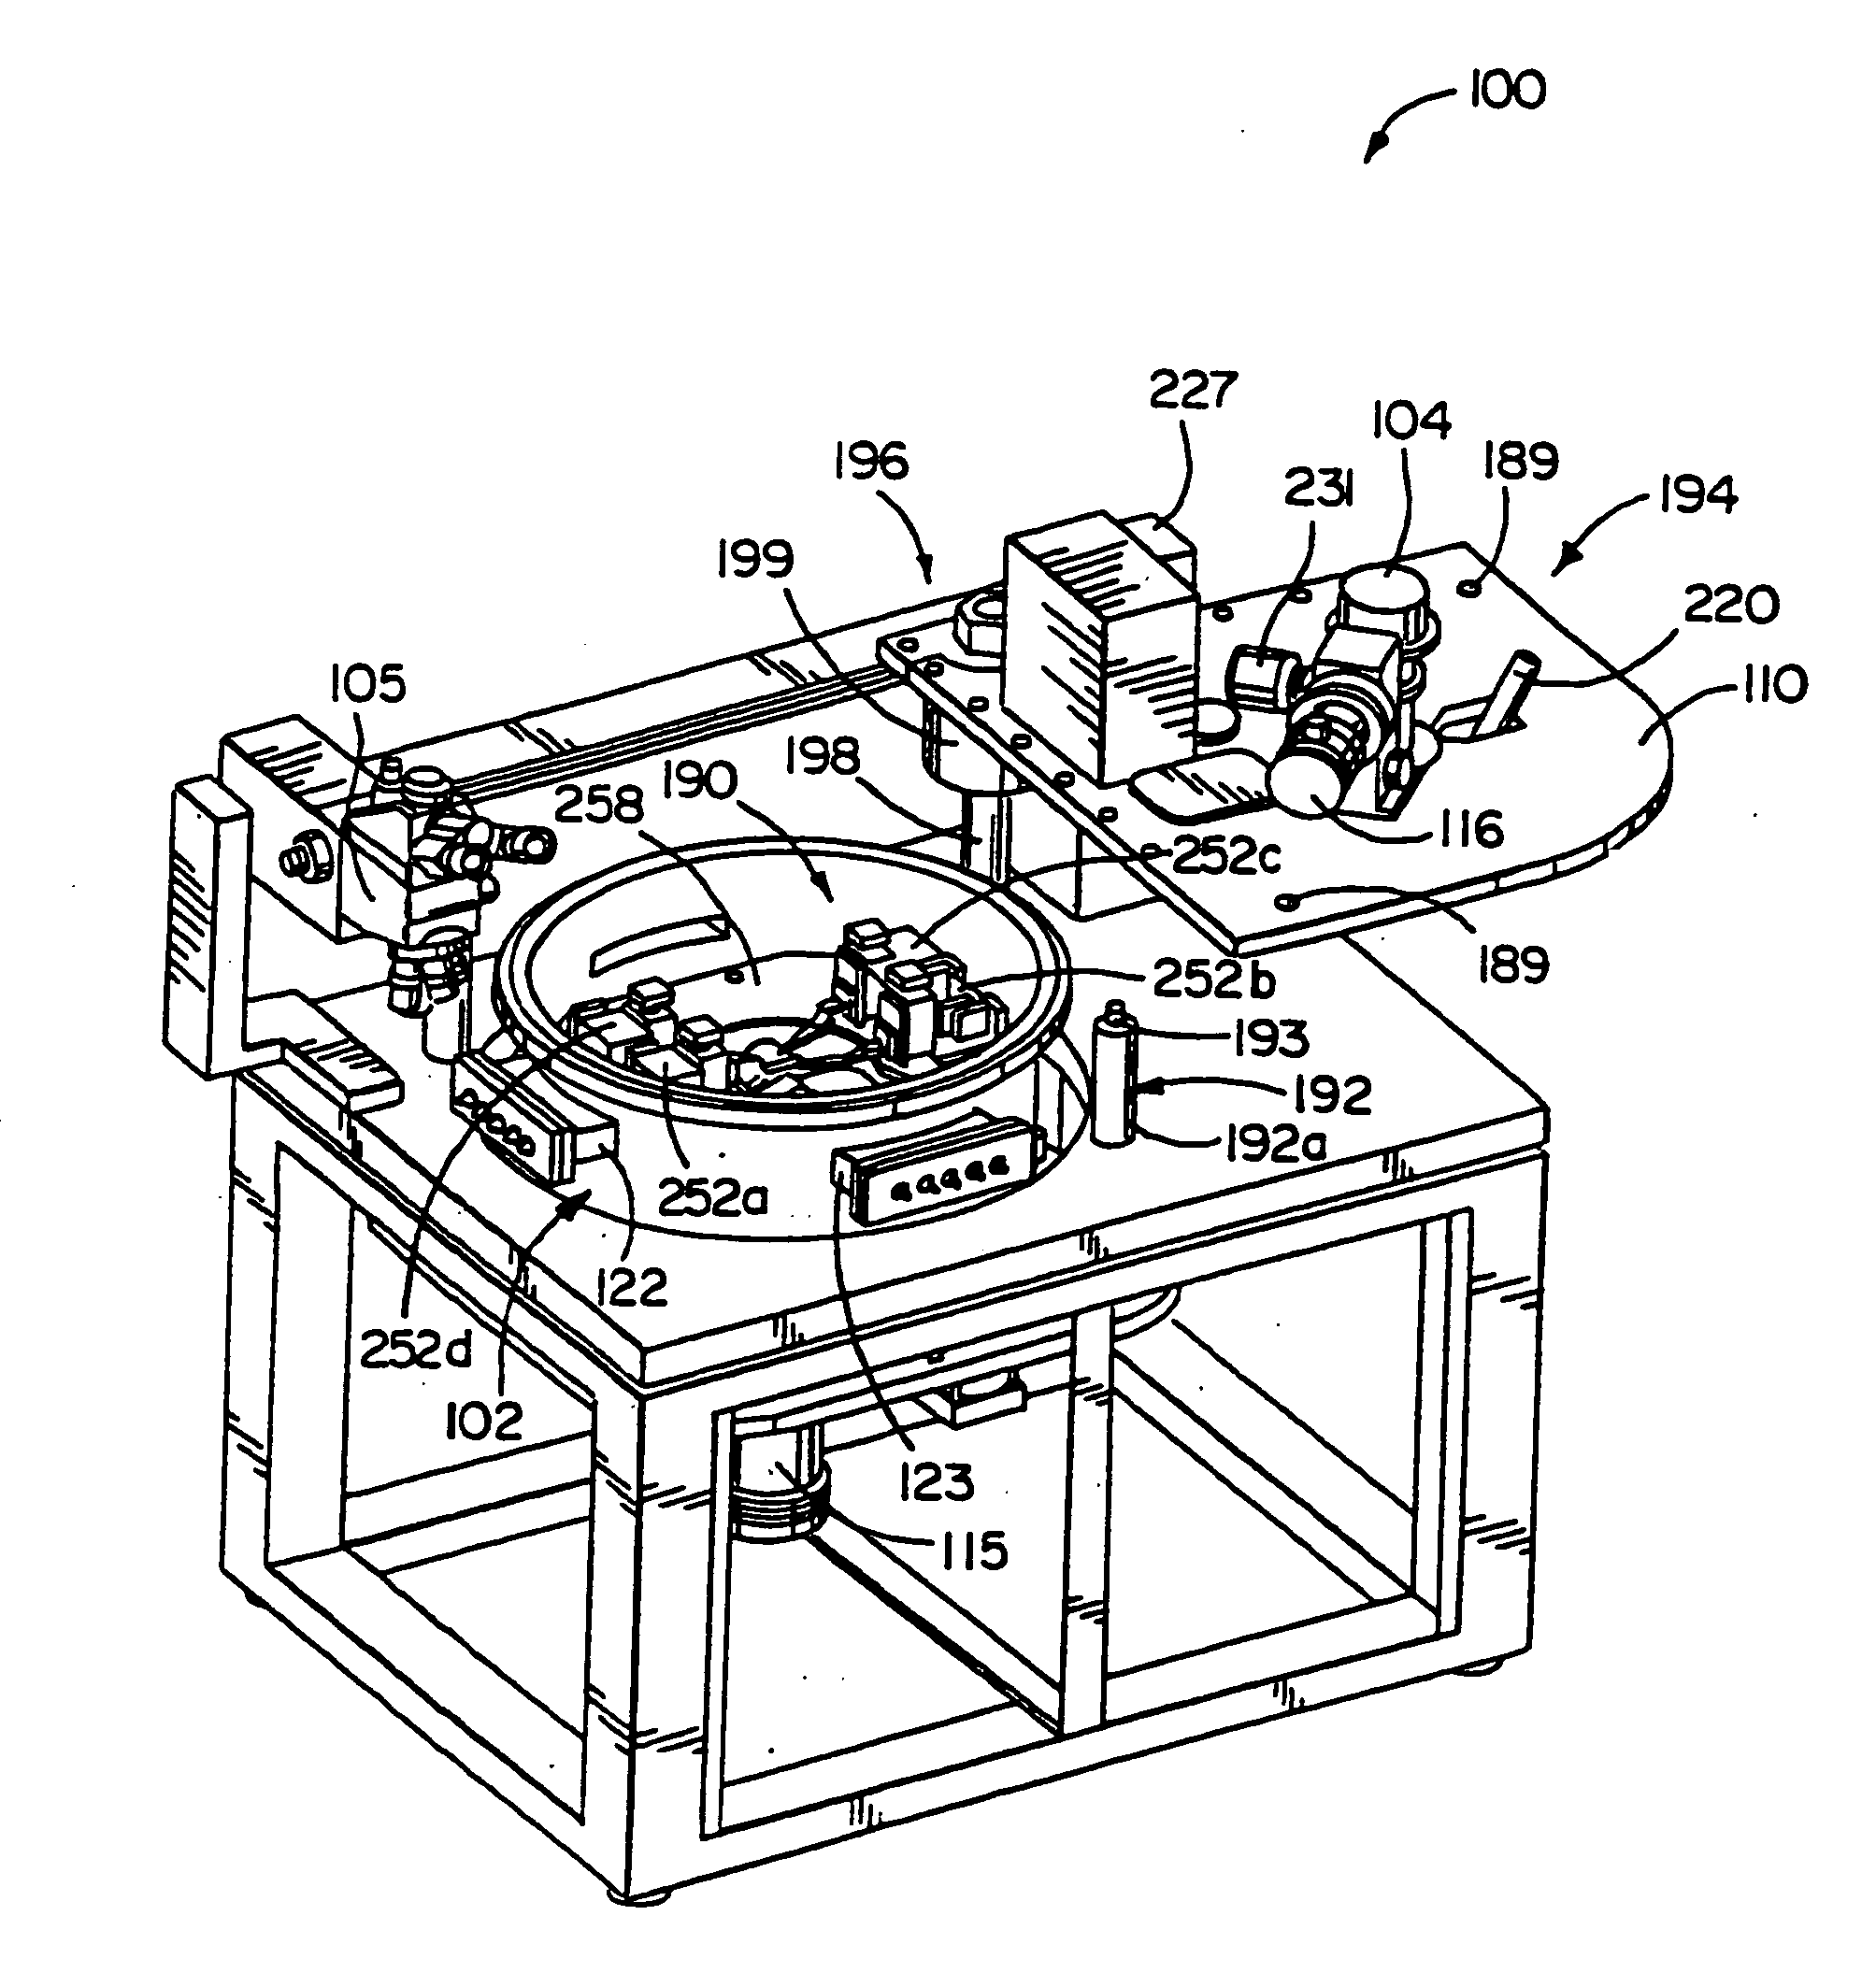 Method and apparatus for maintaining accurate positioning between a probe and a DUT